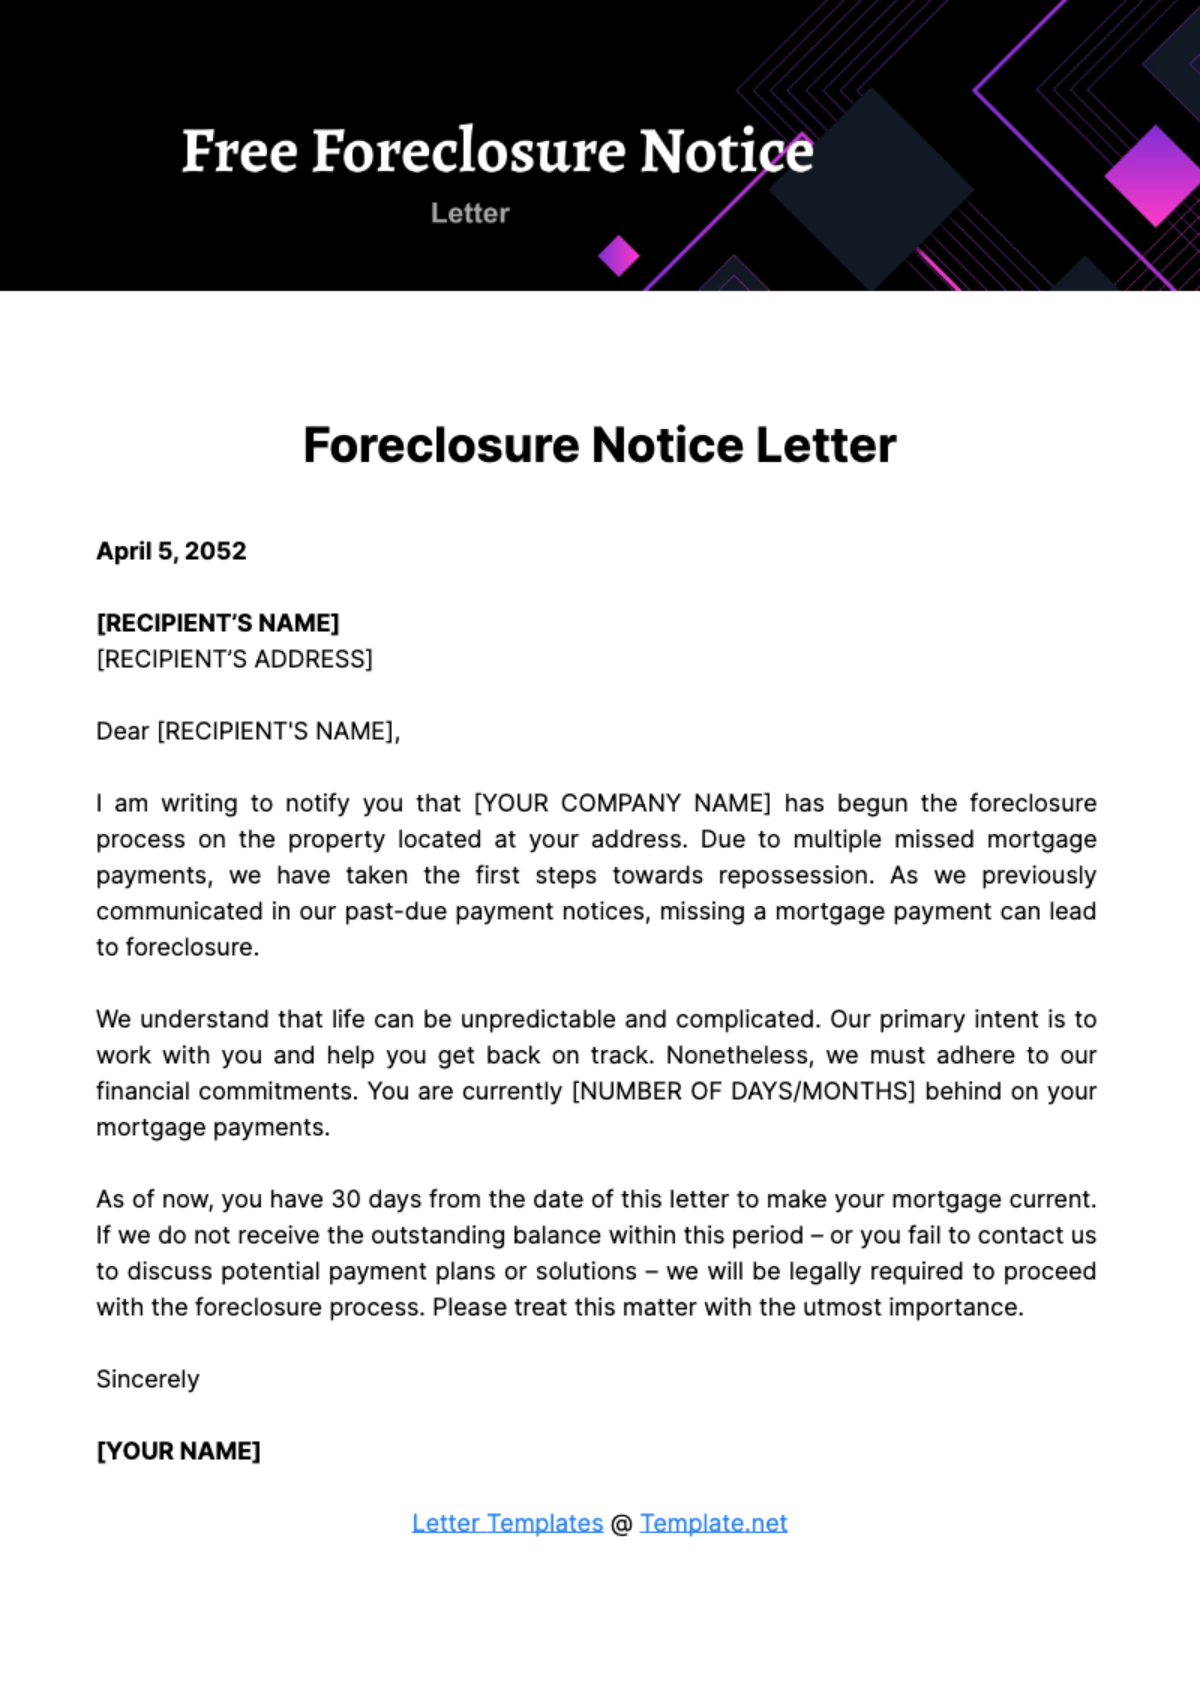 Free Foreclosure Notice Letter Template